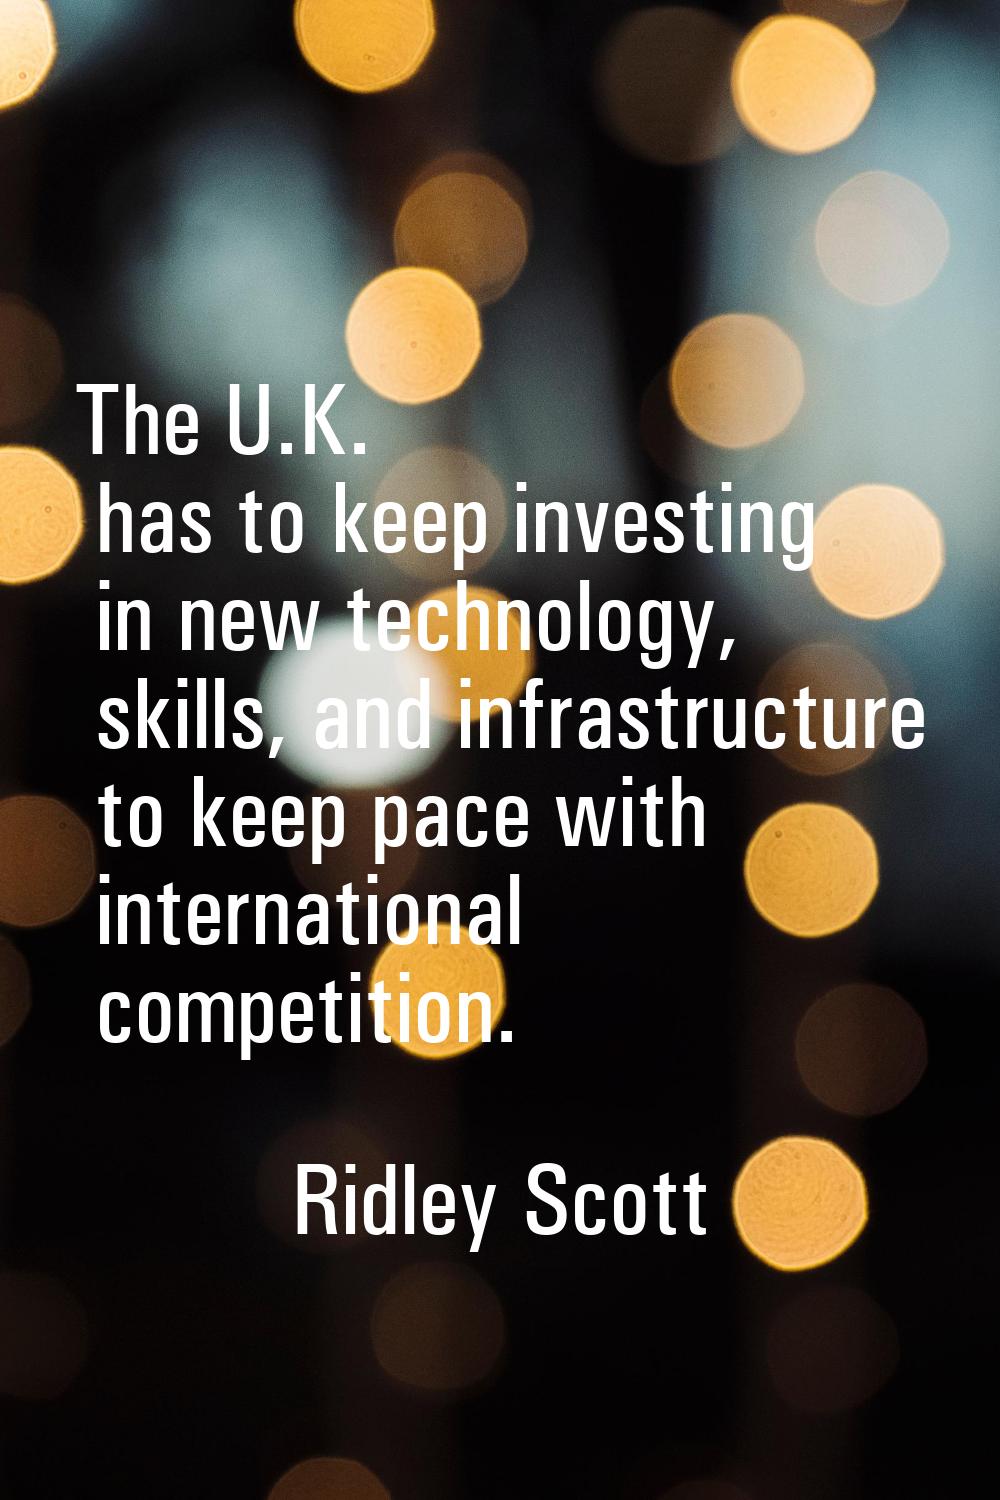 The U.K. has to keep investing in new technology, skills, and infrastructure to keep pace with inte